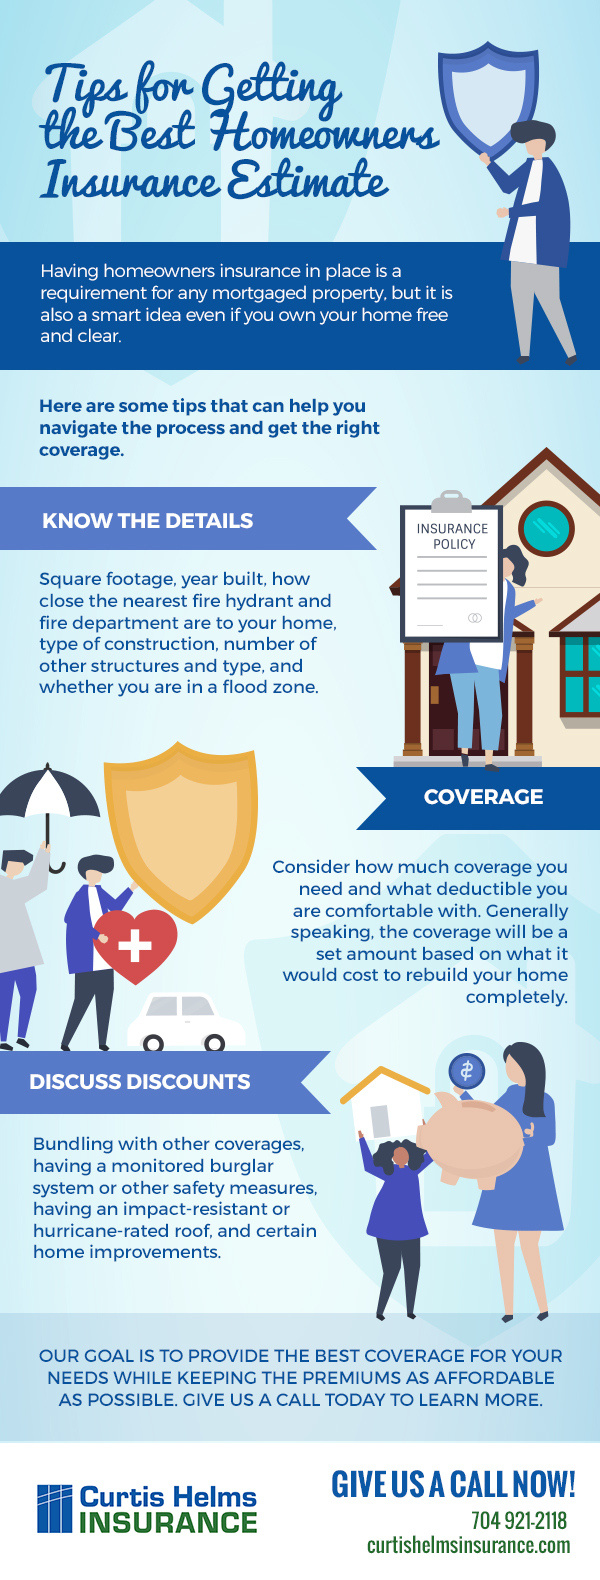 Tips for getting the best homeowners insurance estimate